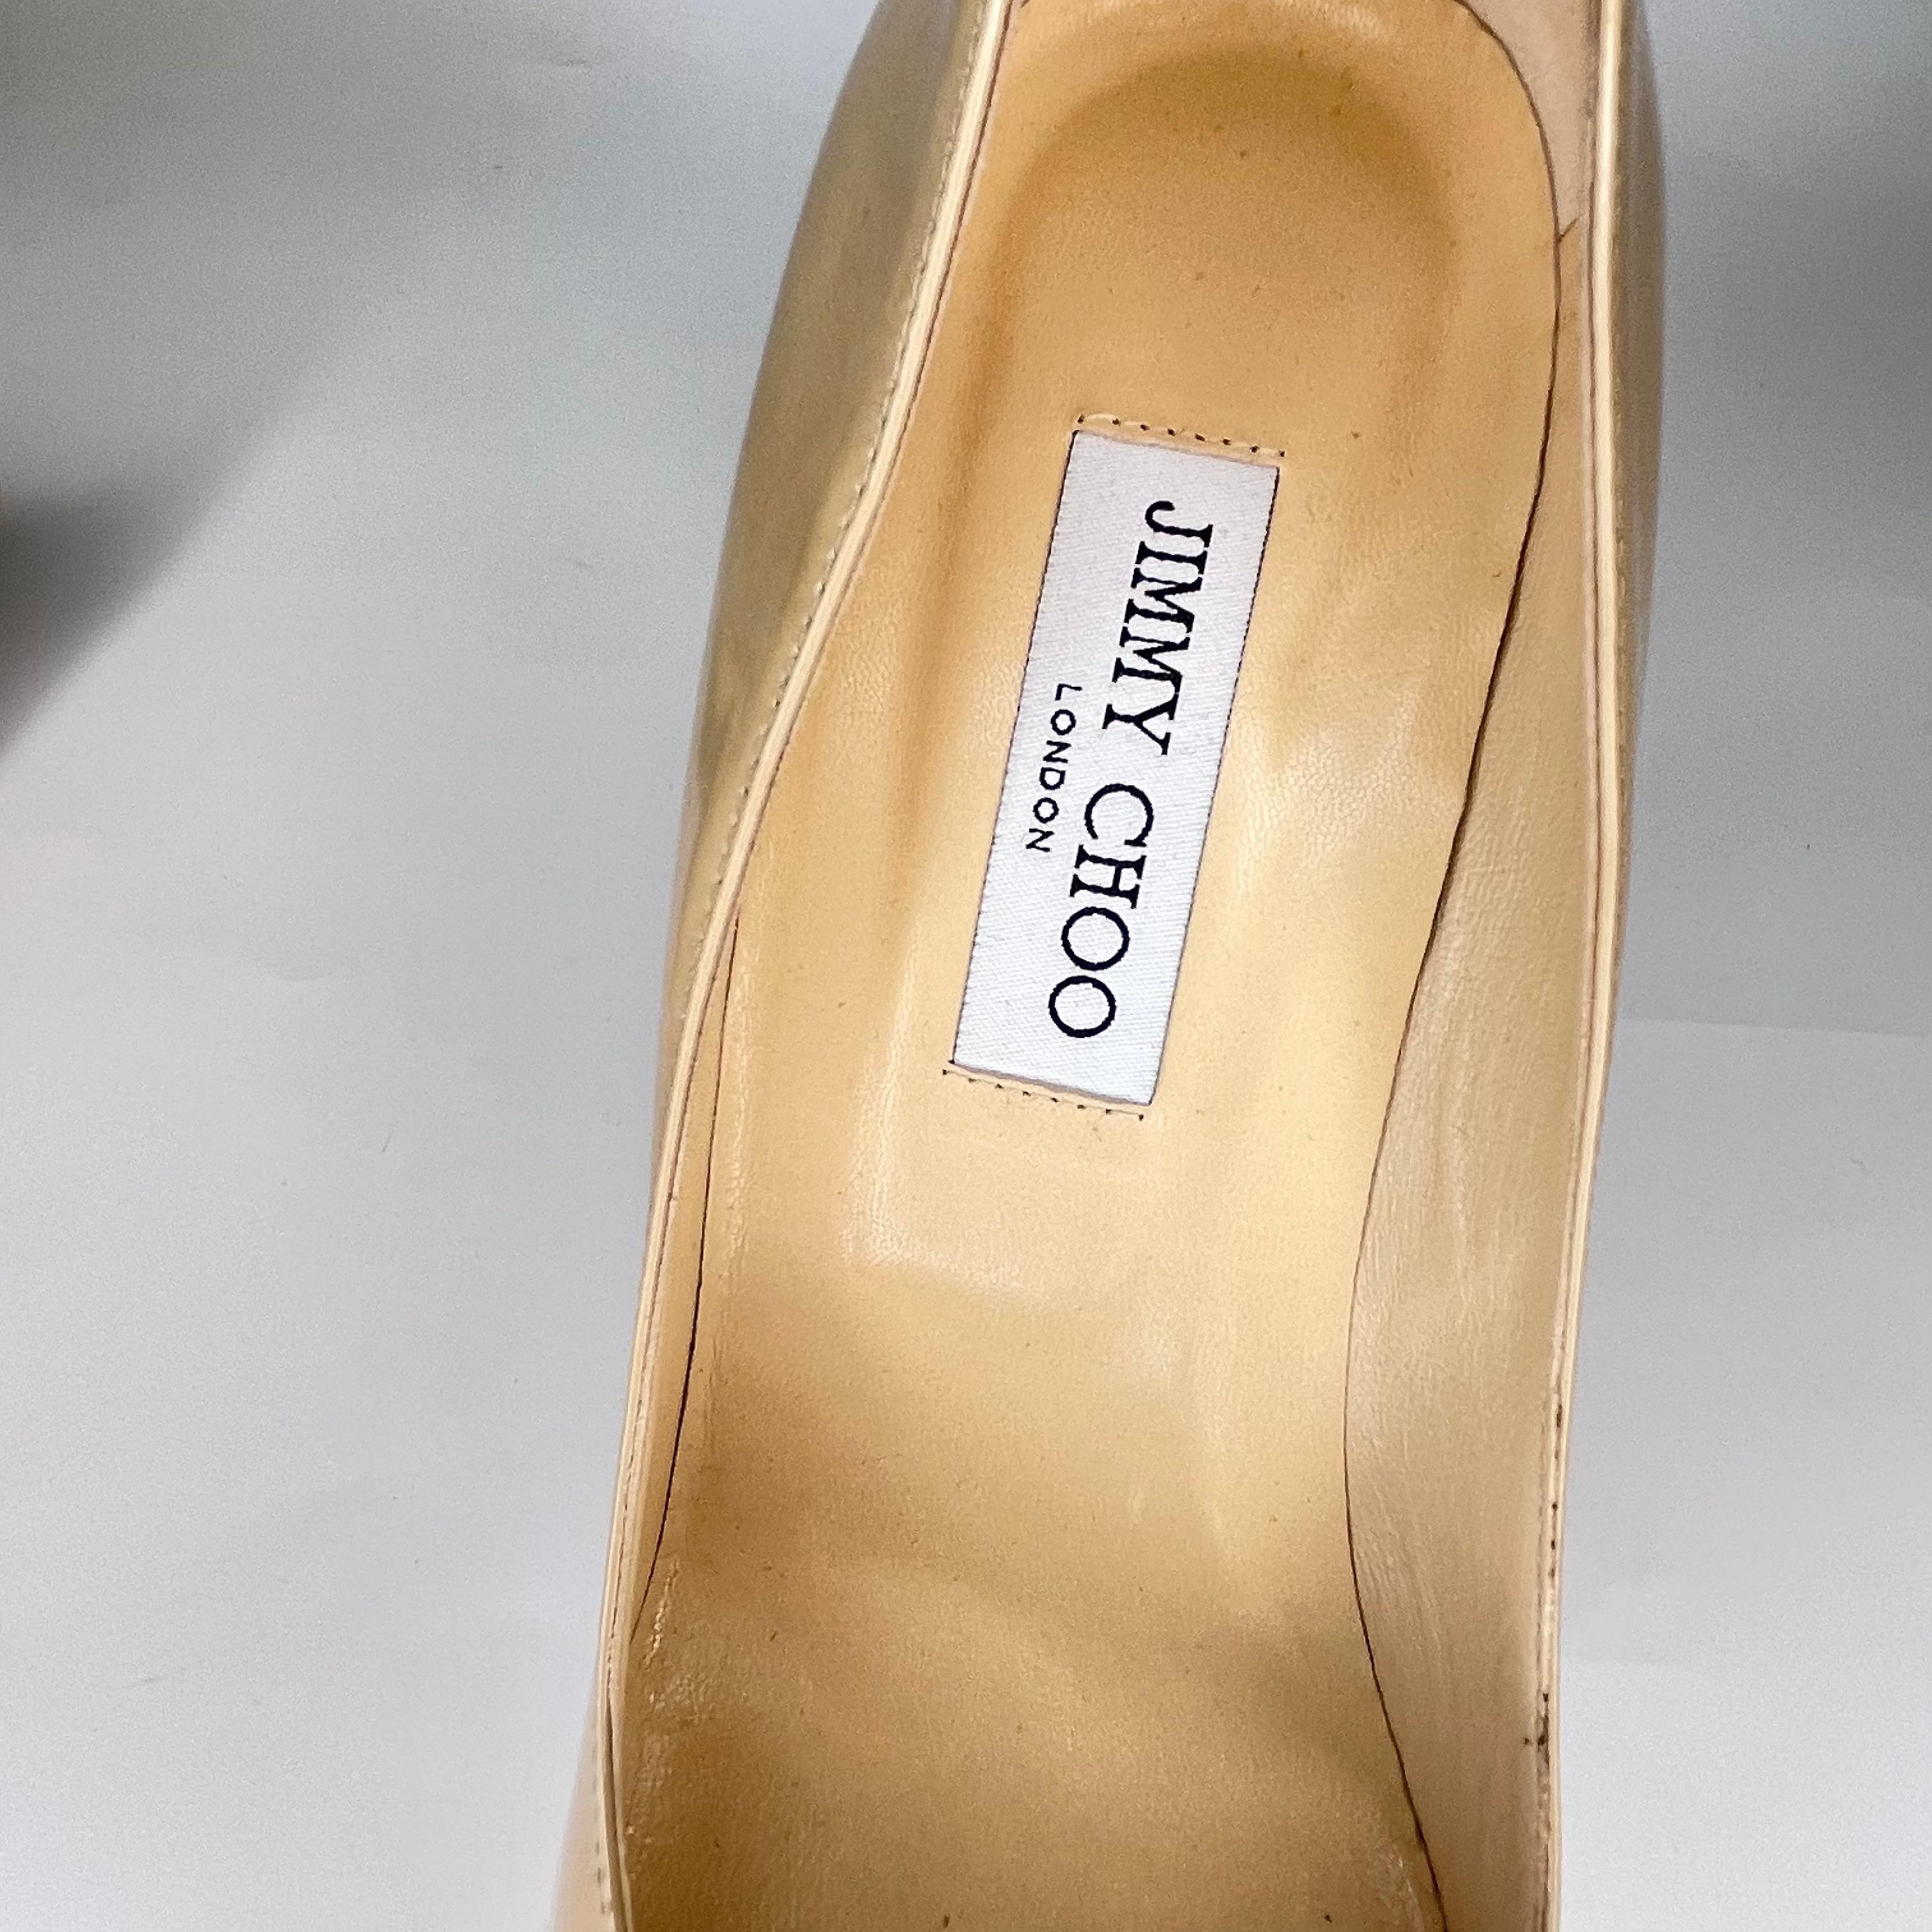 Jimmy Choo Alex Platform Pump Nude (42 EU) In Excellent Condition For Sale In Montreal, Quebec